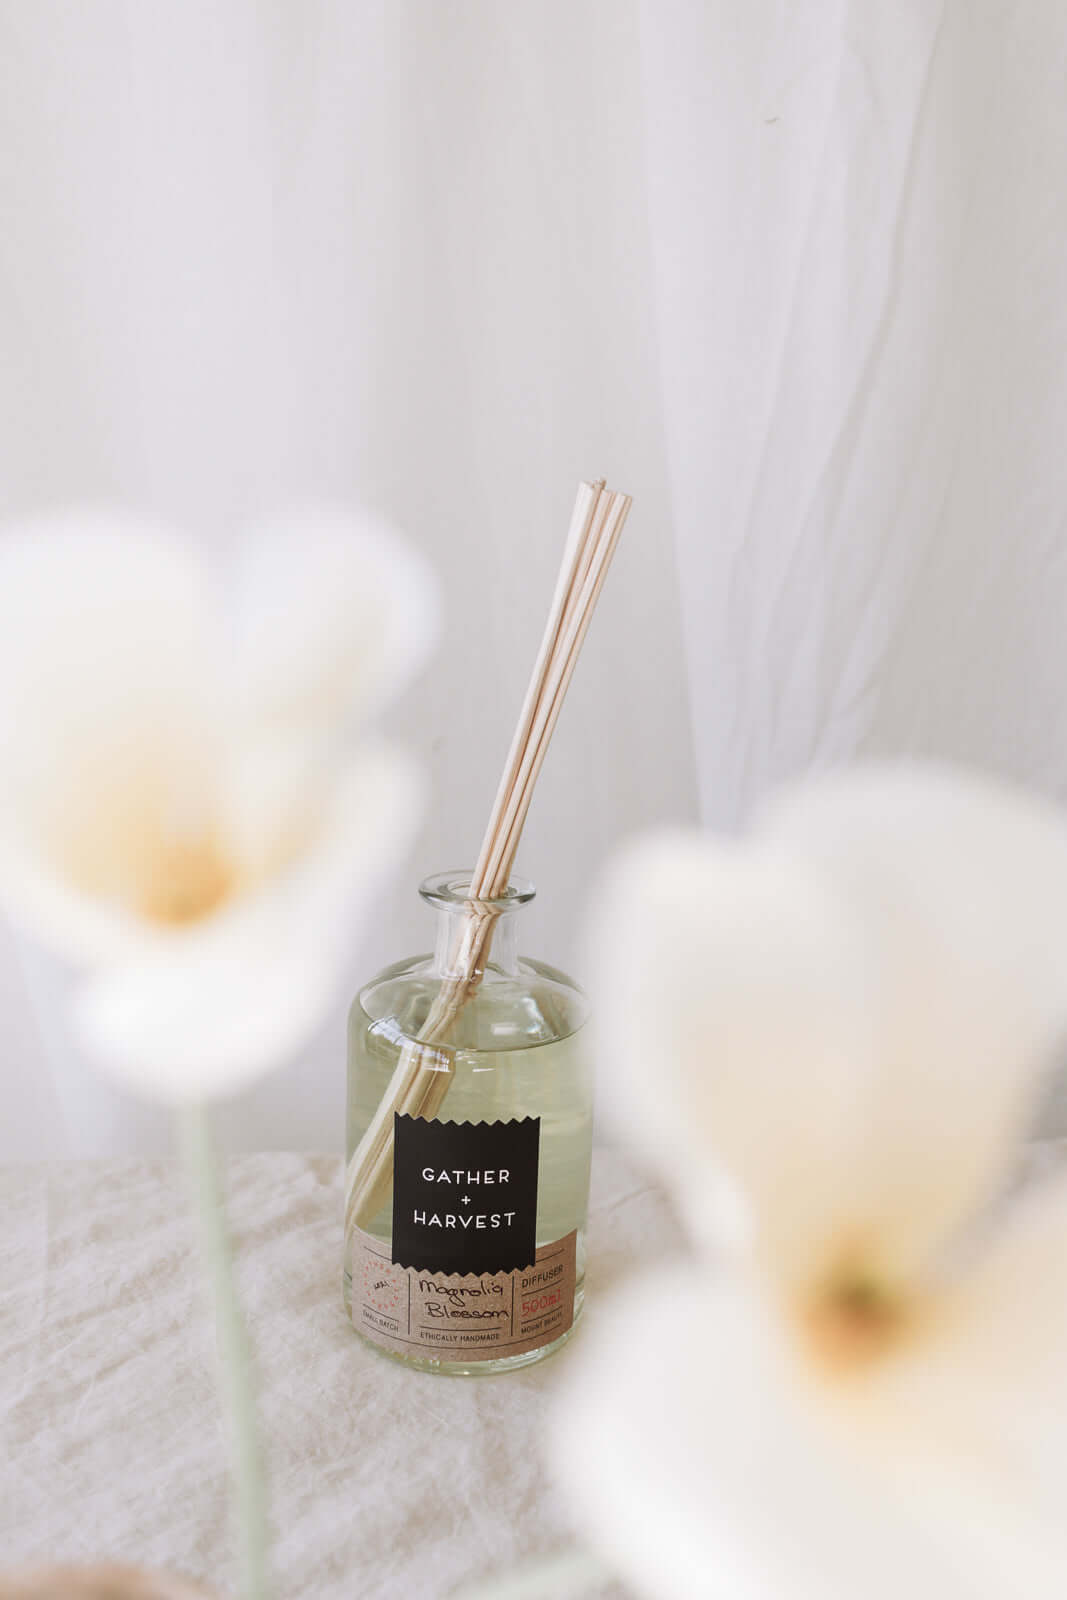 The best Magnolia Blossom Reed Diffuser in Australia. It adds a pleasant scent to your home creating a cozy atmosphere.